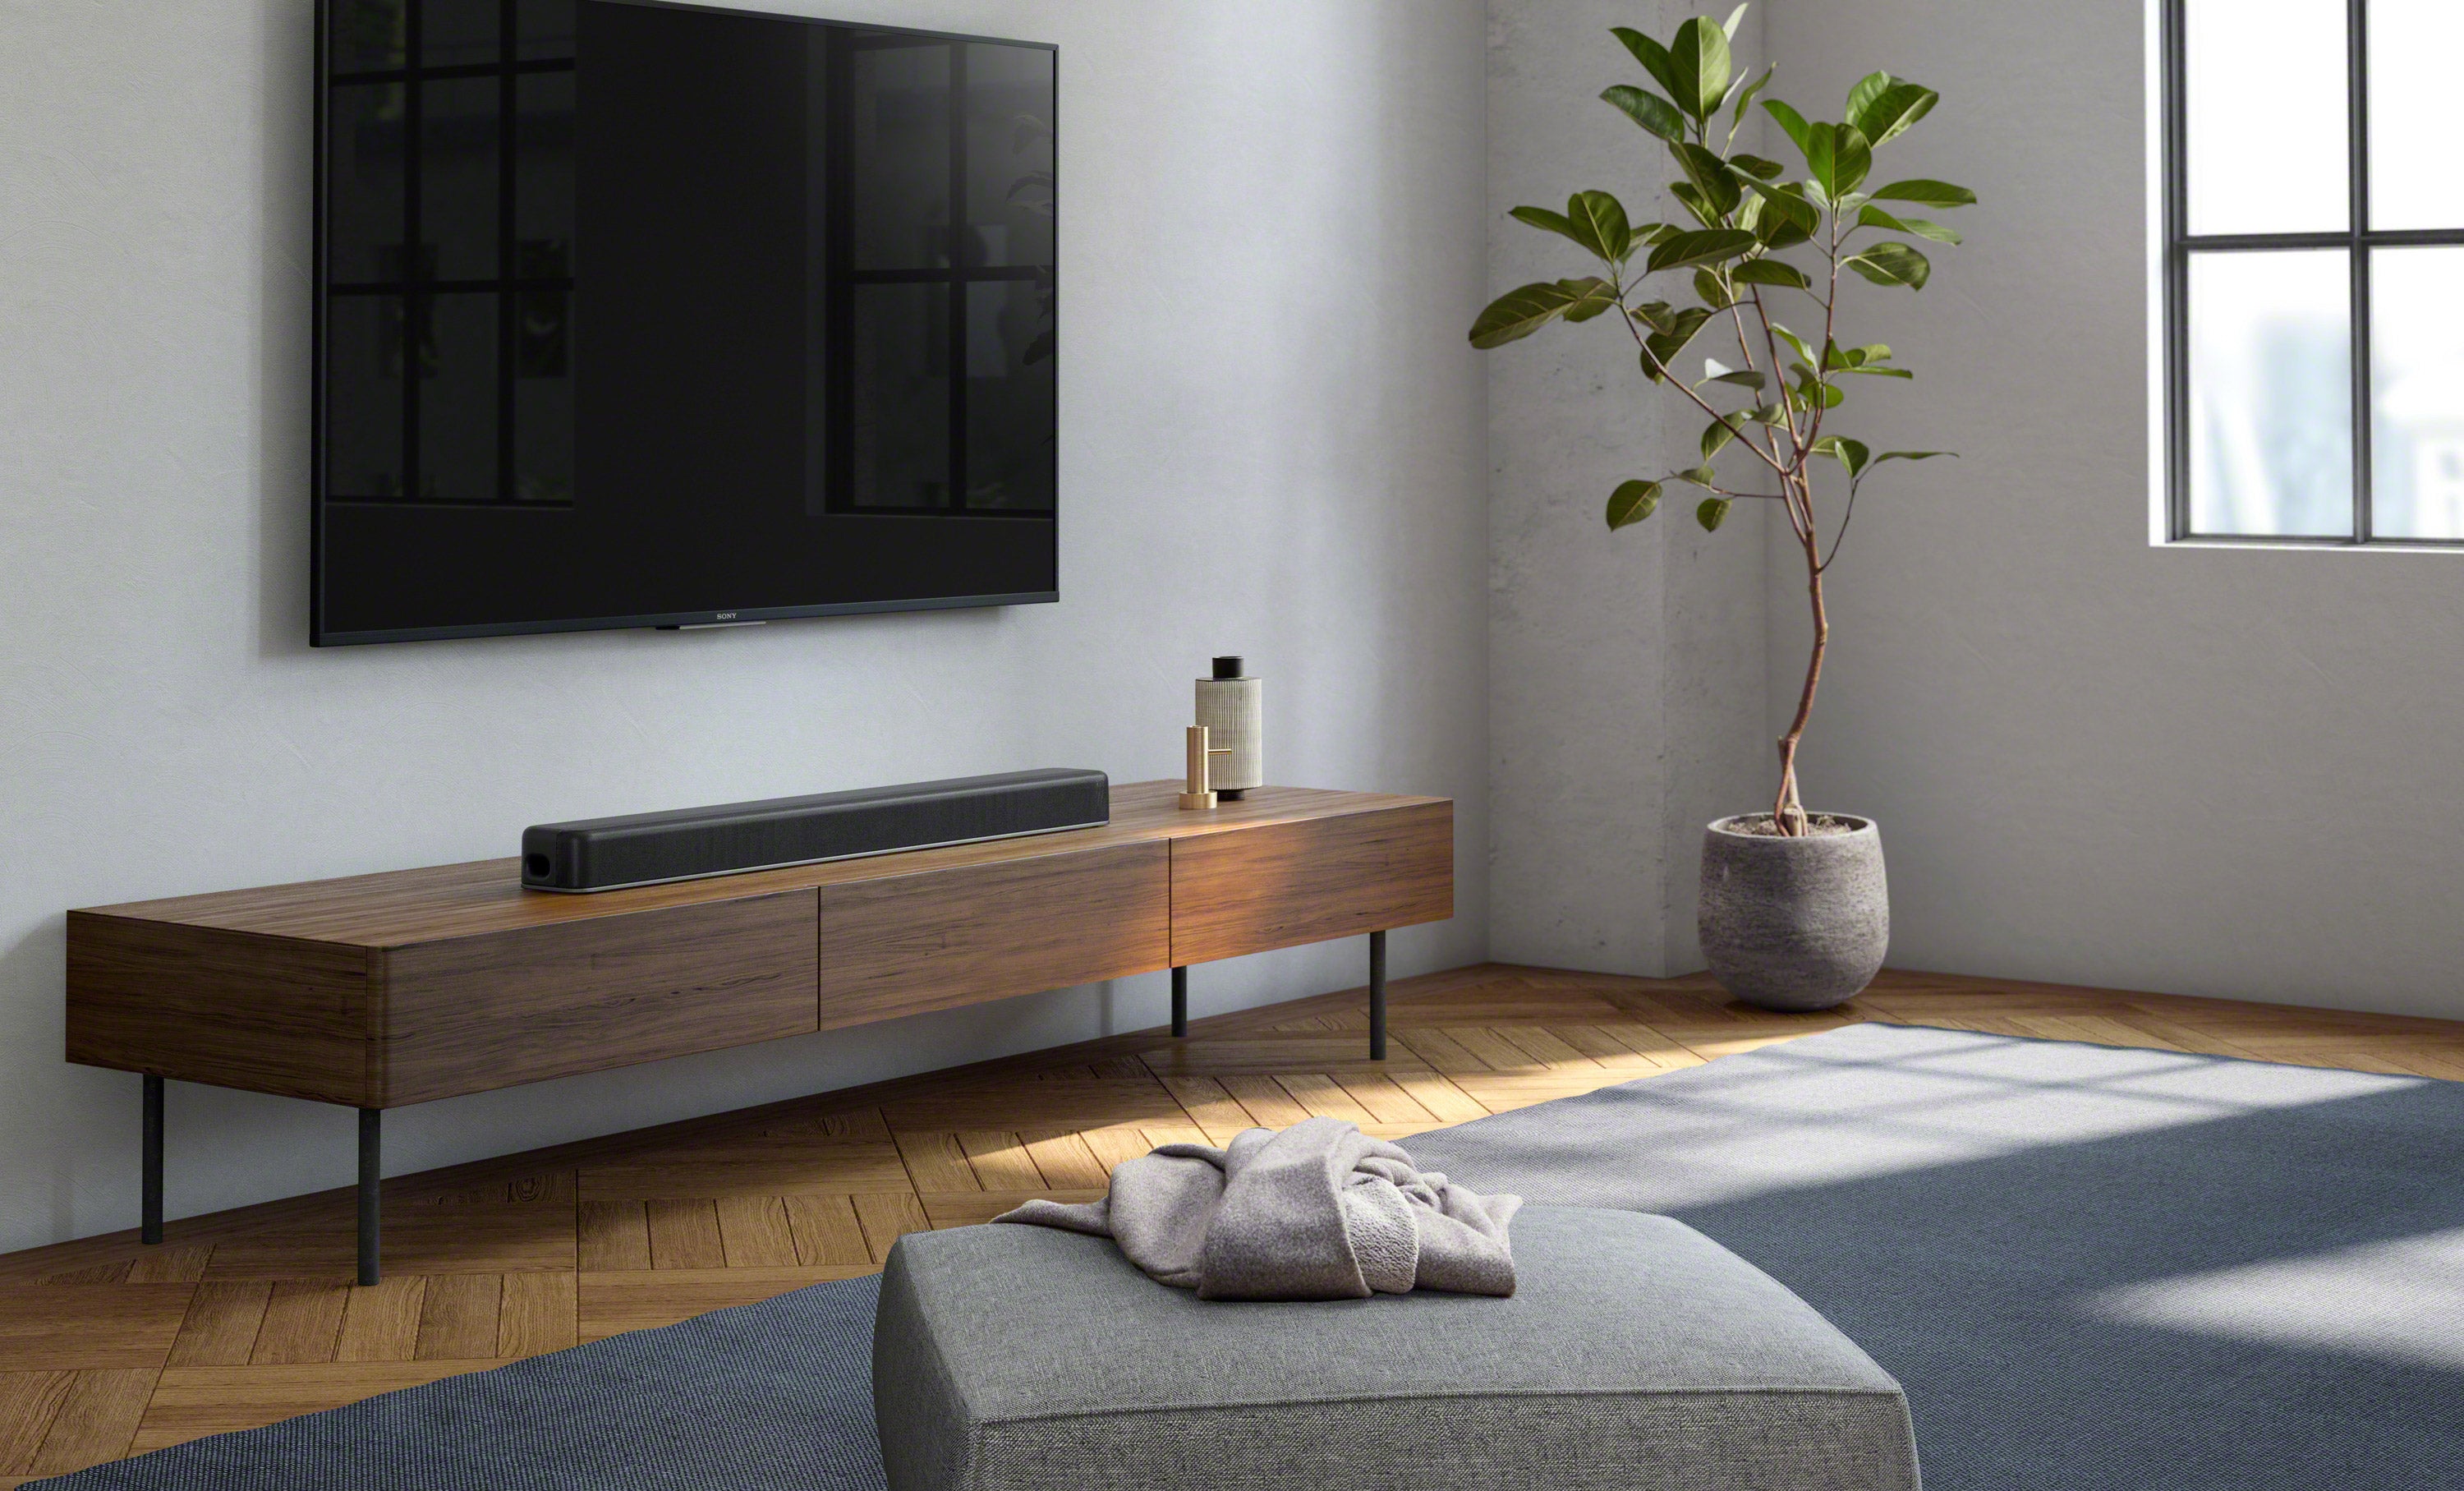 2.1ch Dolby Atmos®/DTS:X® Single Soundbar with built-in subwoofer | HT-X8500